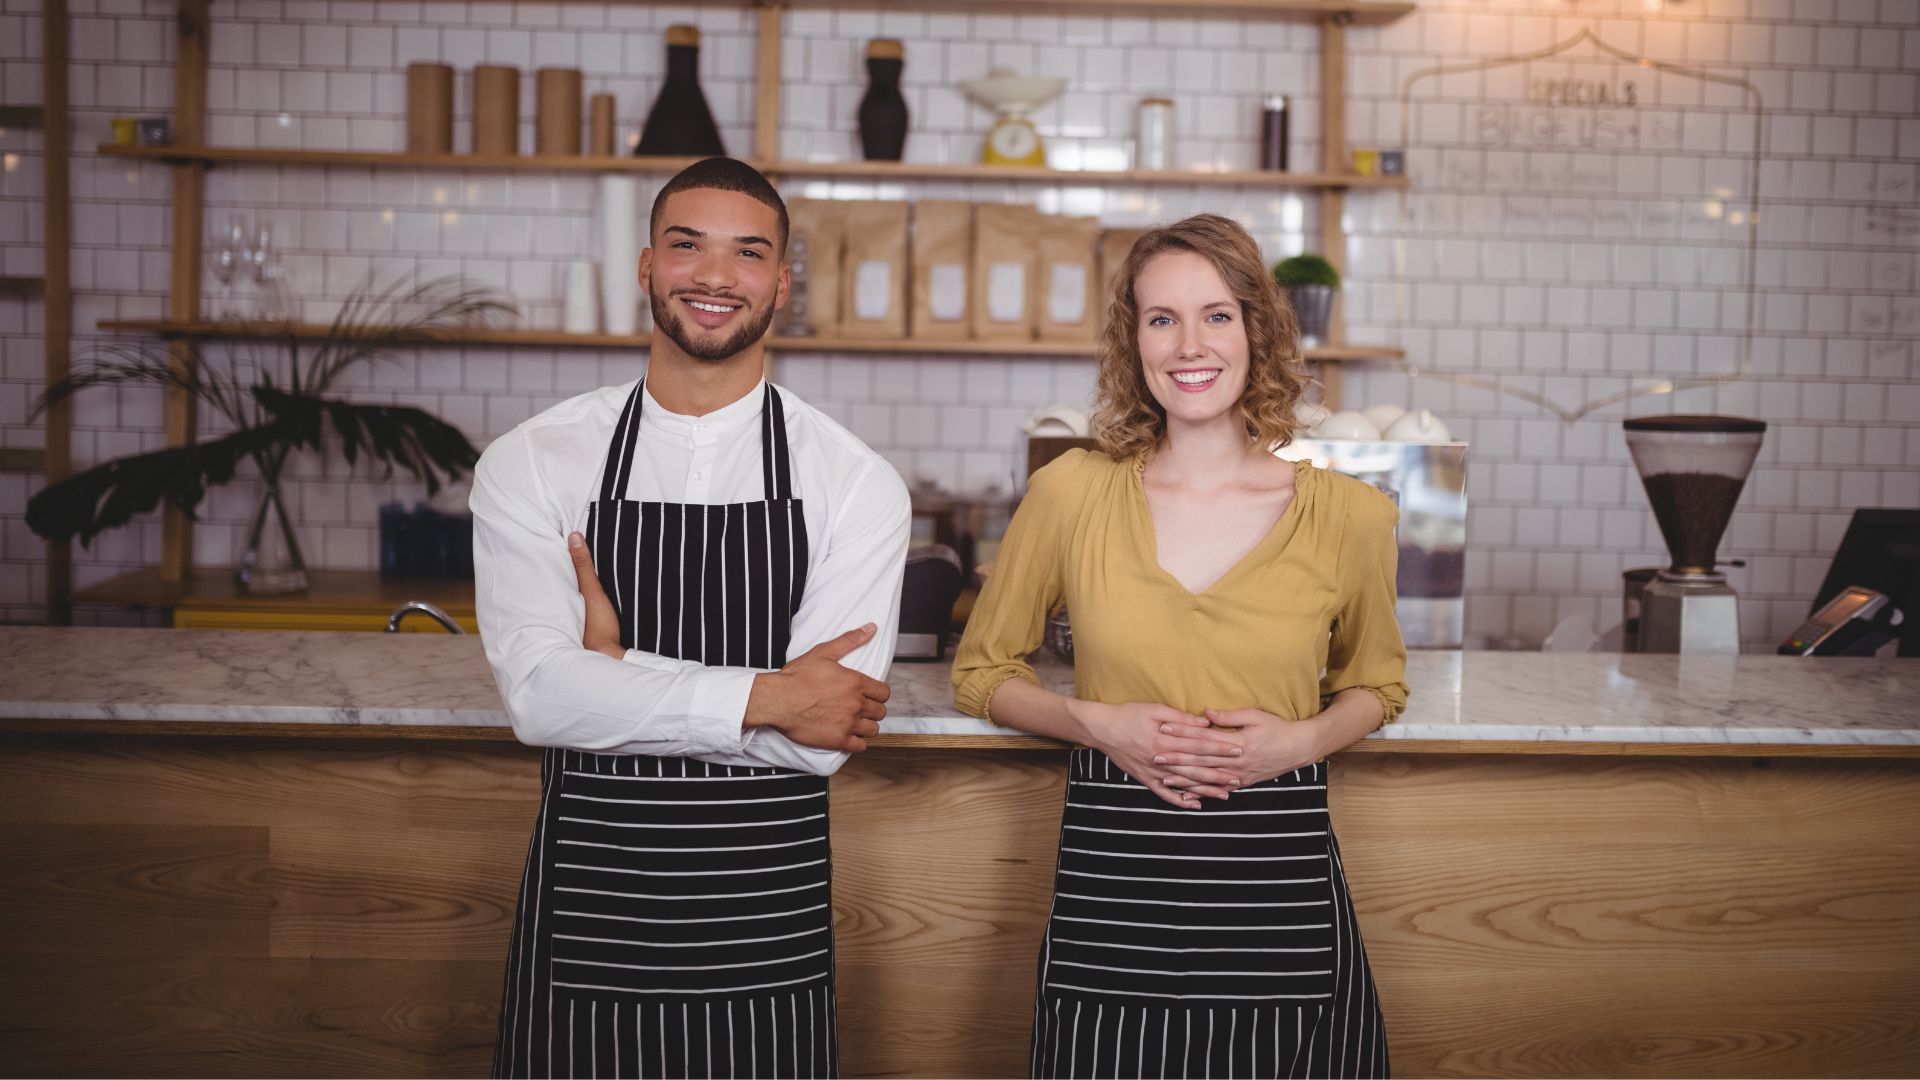 image showing two waiting staff members about to help customers before their shift